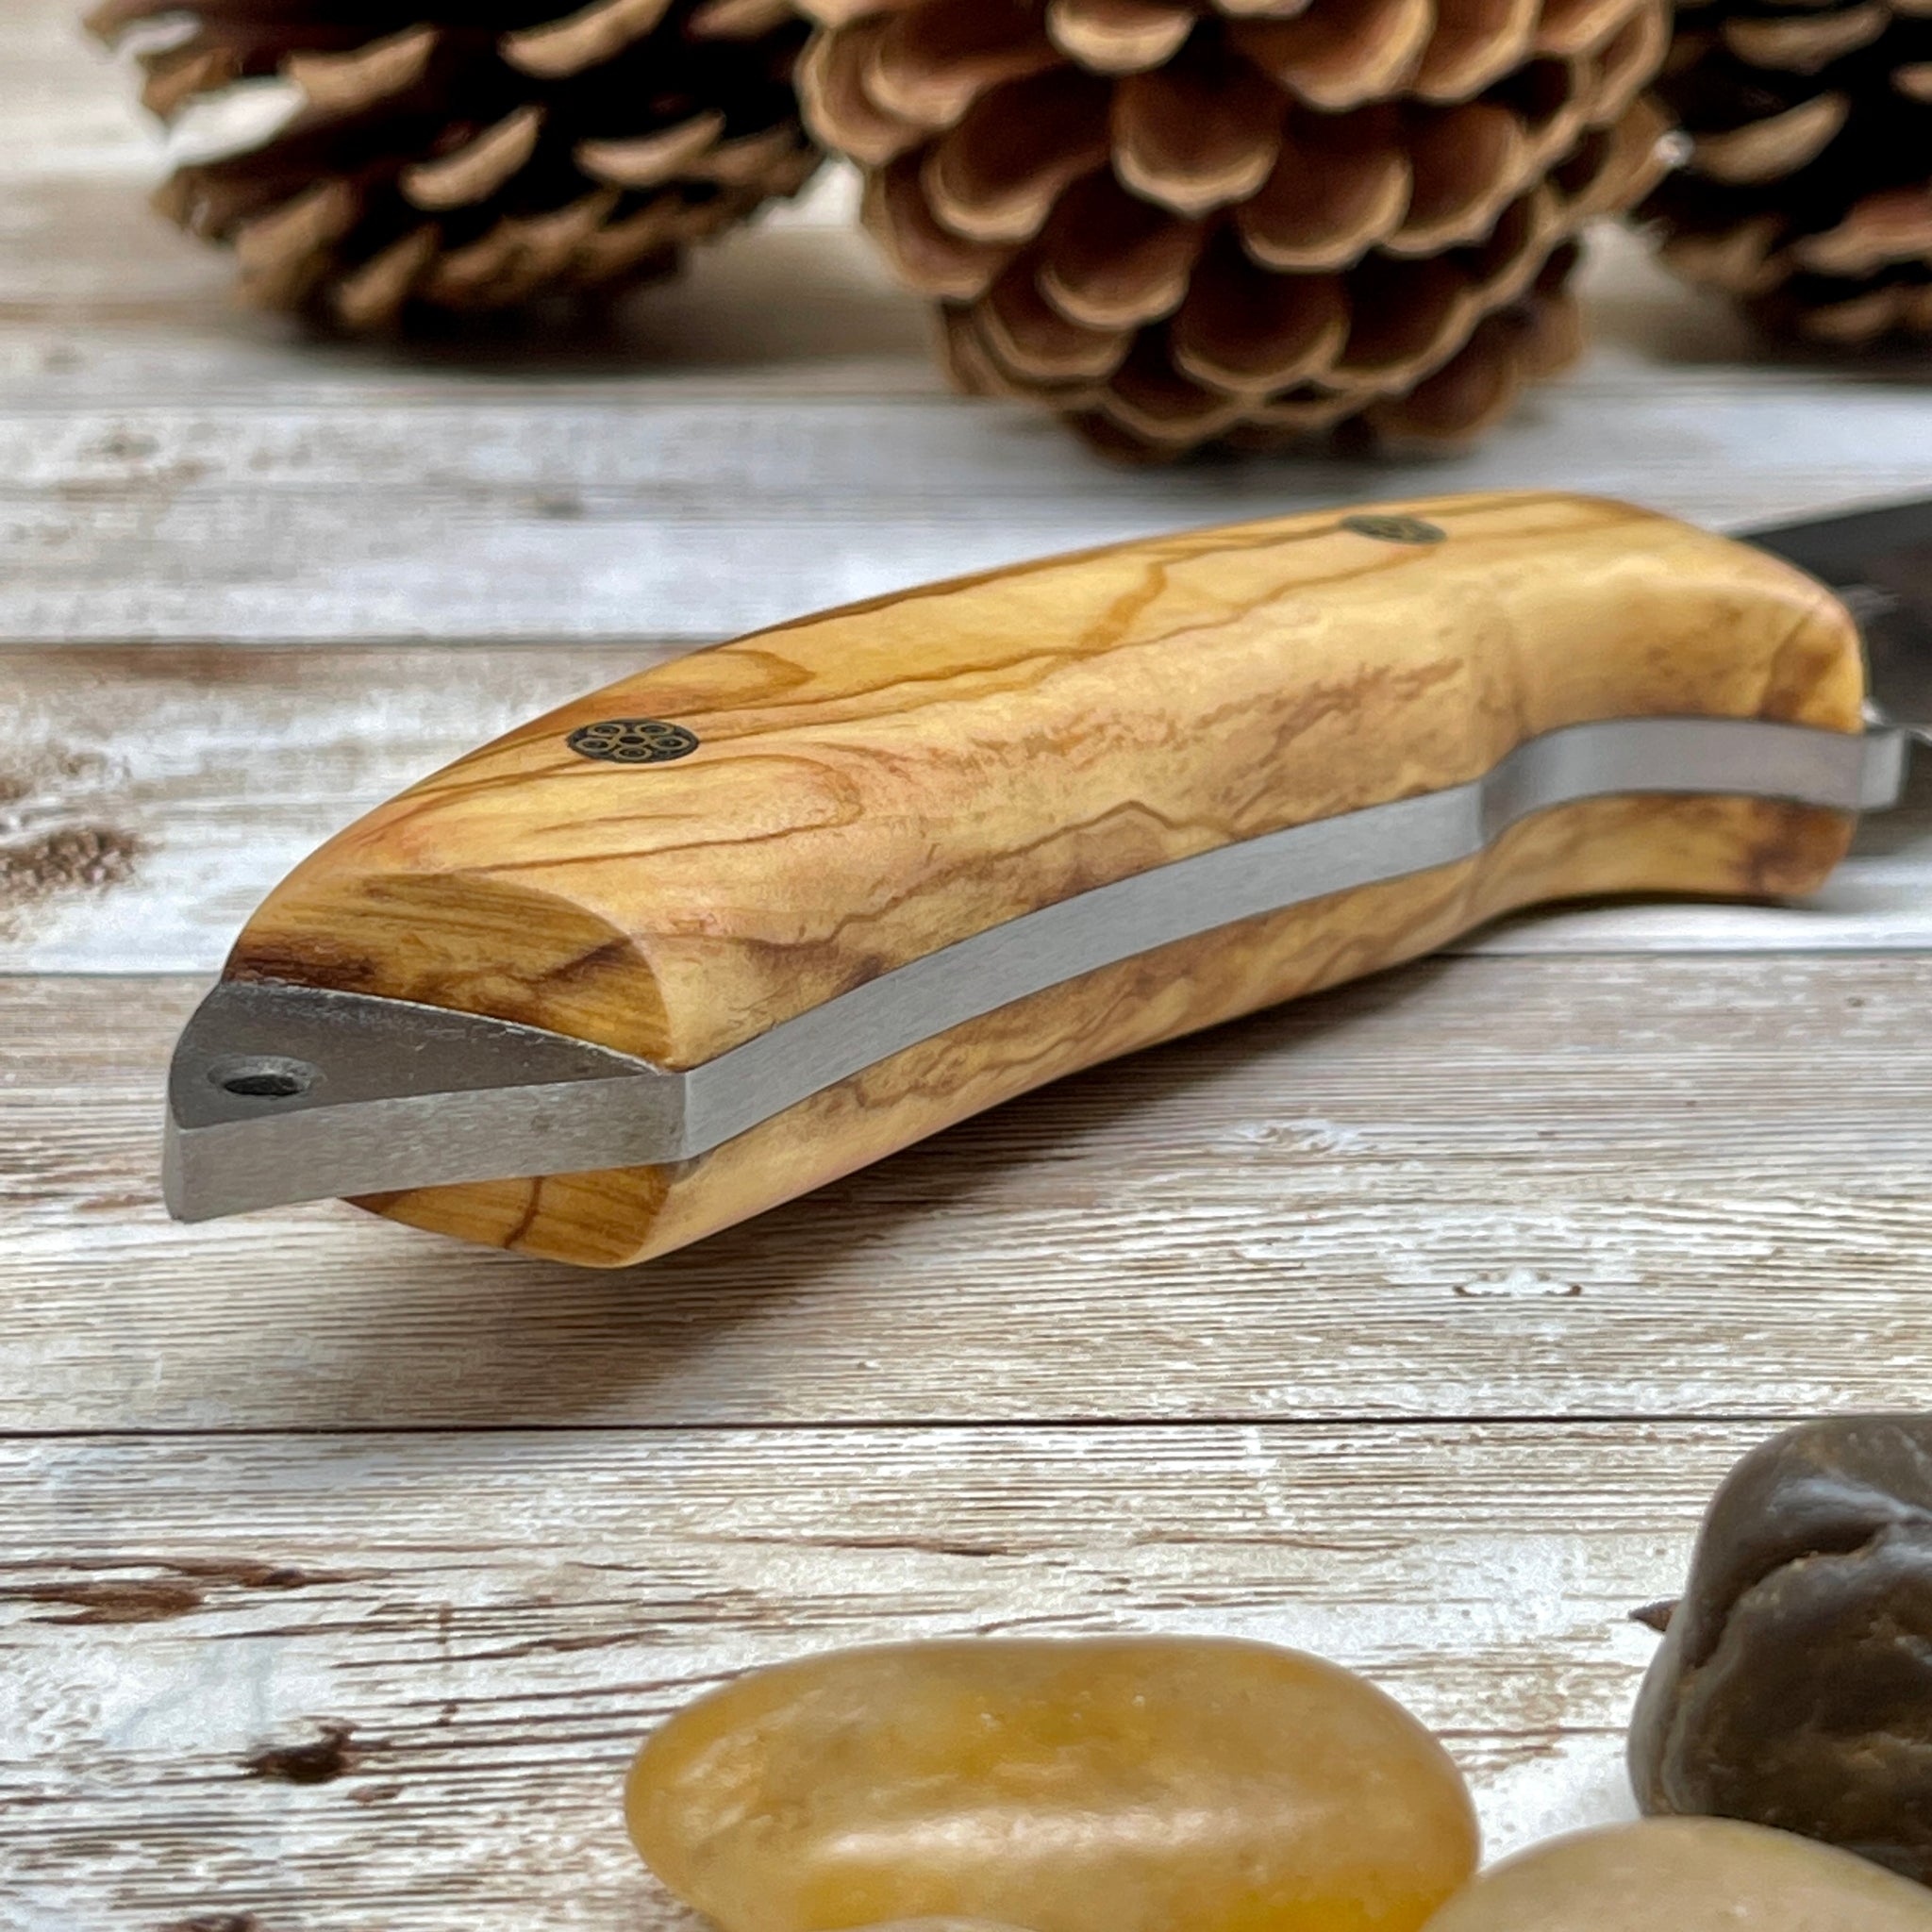 Camping Knife With Olive Wood Handle, 1/4 Inch N 690 Steel and Leather  Sheath, Drop Point N690 Steel Blade, Unique Root of Olive Tree Handle -   Israel